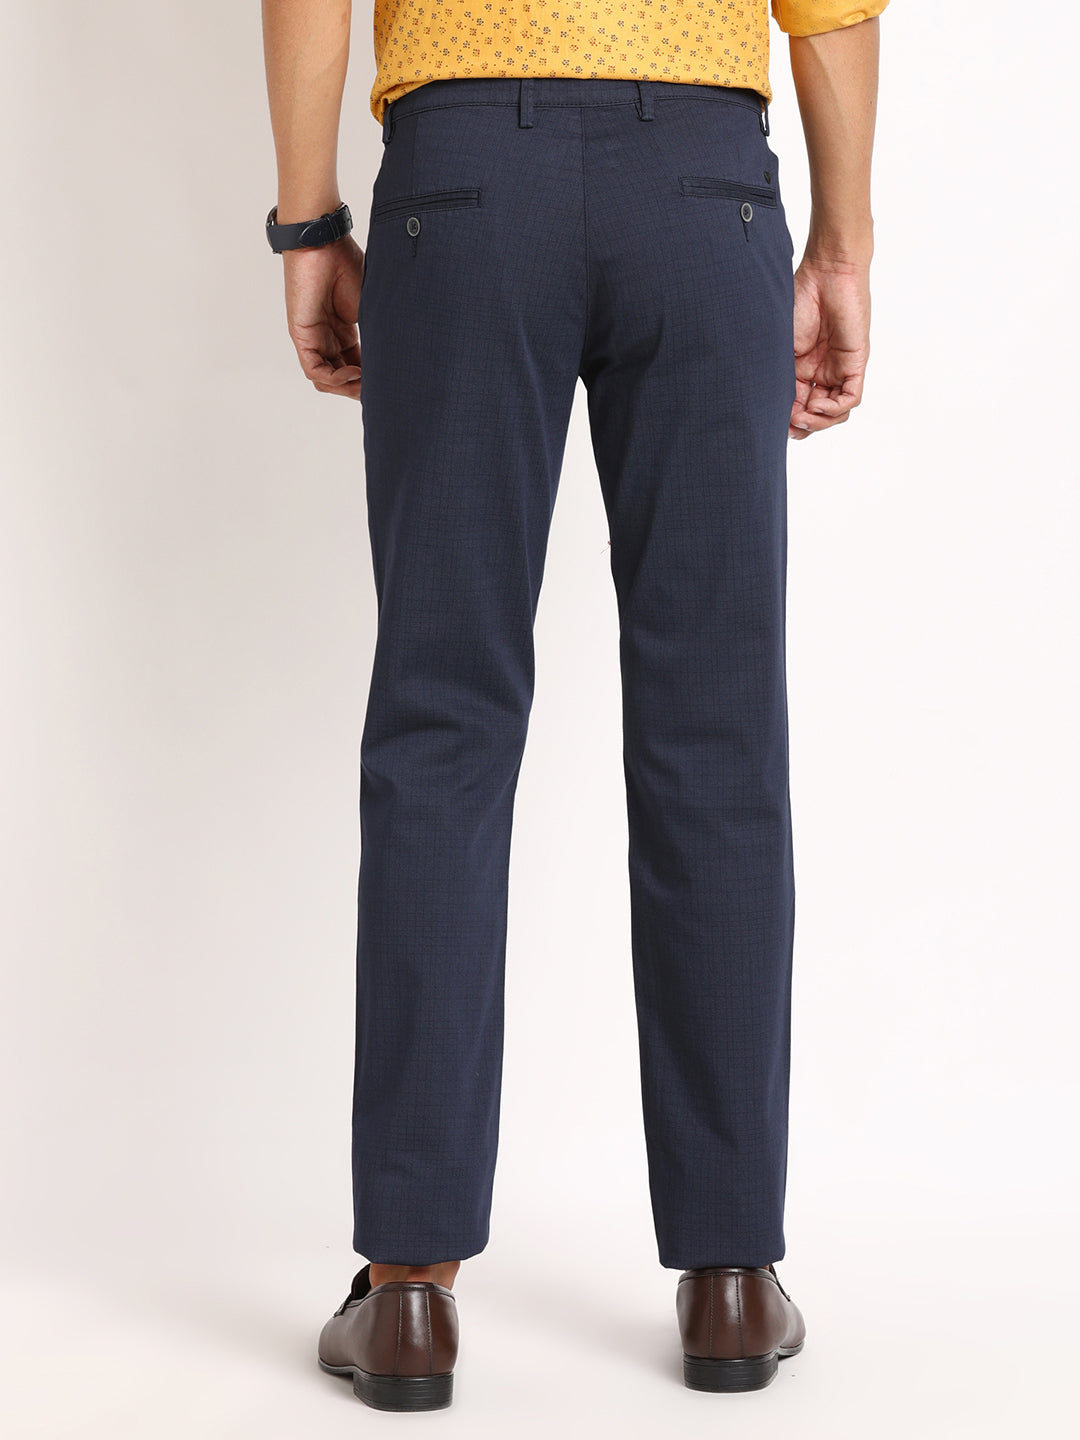 Cotton Stretch Navy Checkered Ultra Slim Fit Flat Front Casual Trouser